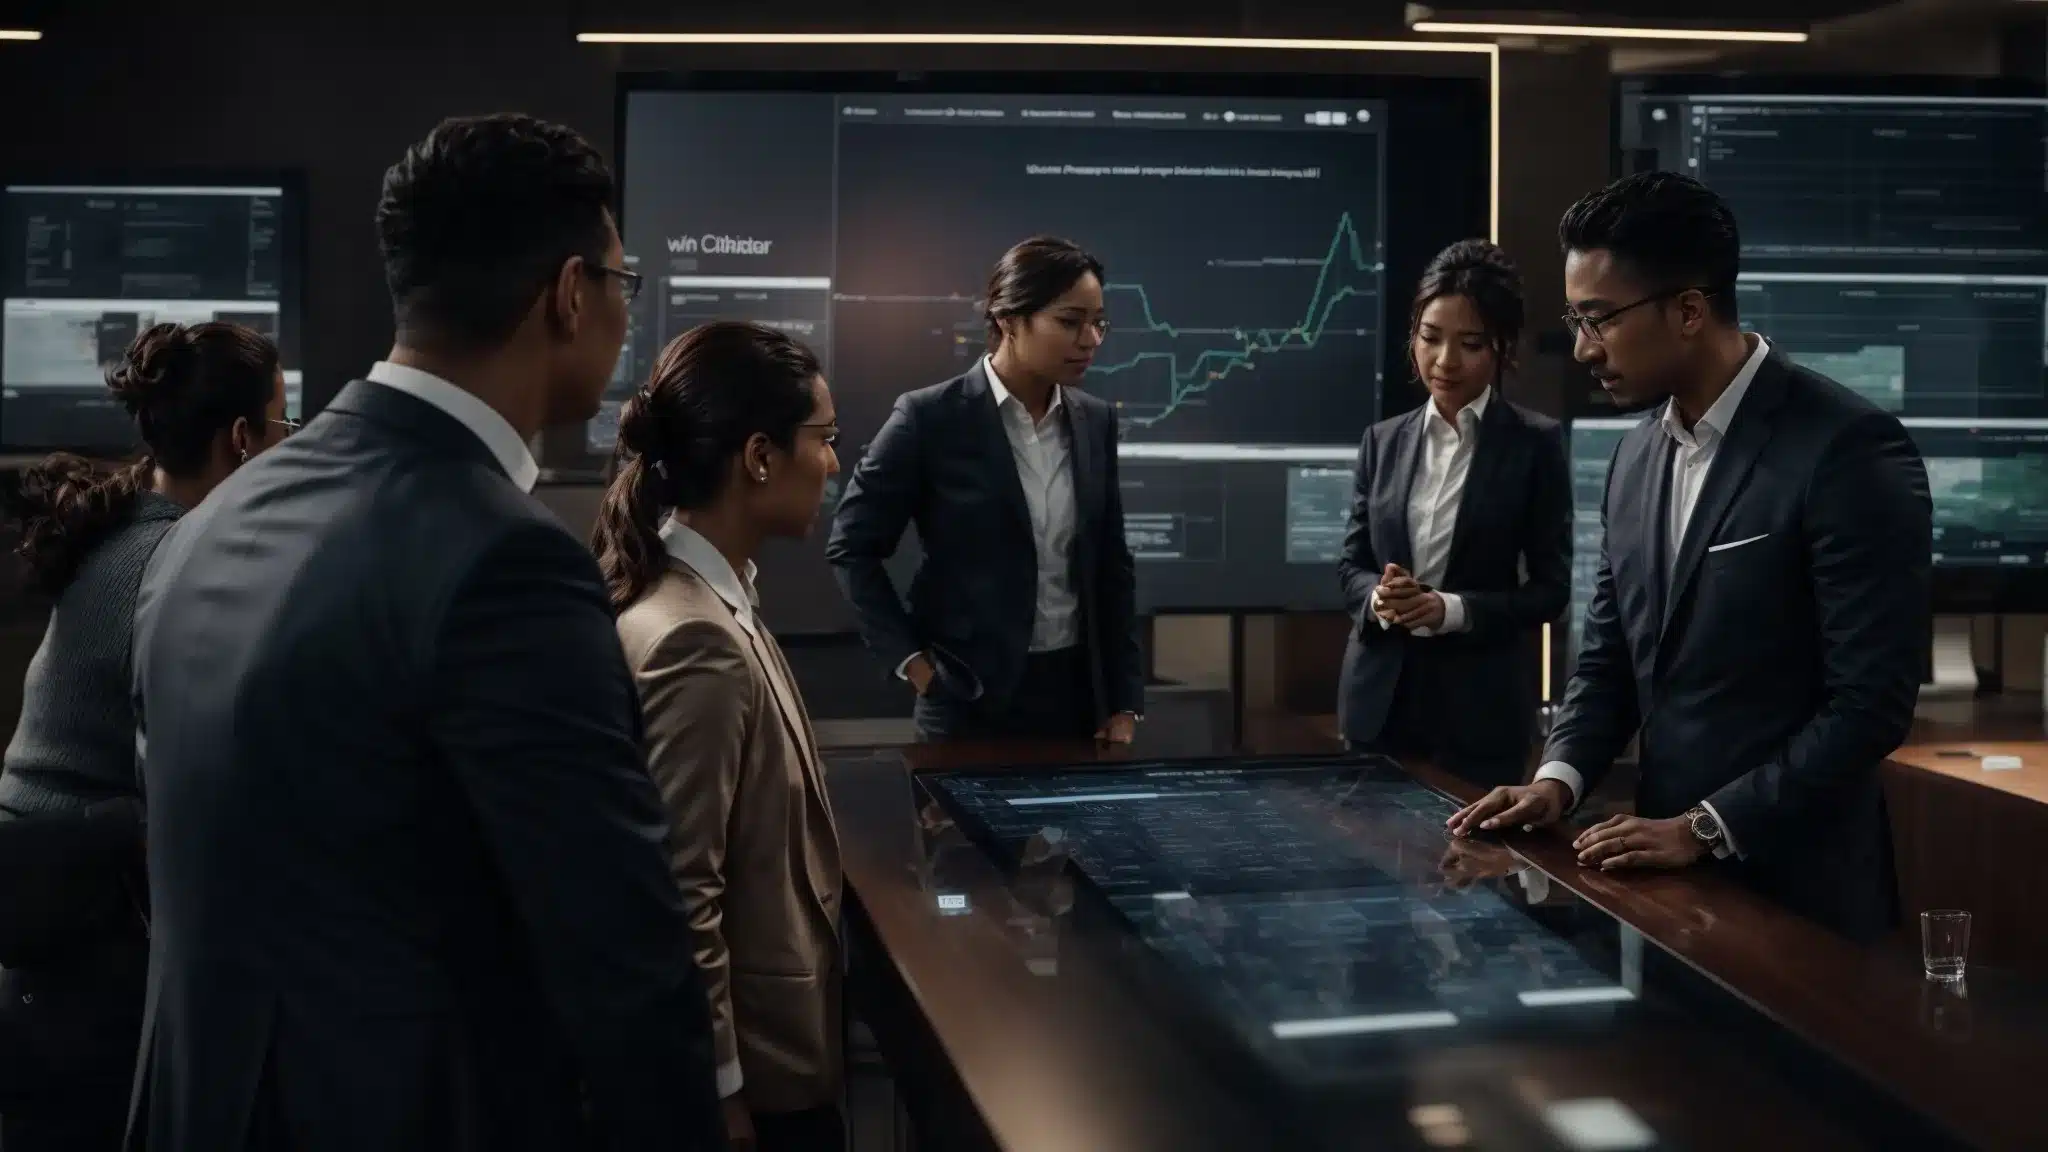 a diverse group of professionals gather around a large touchscreen display, interacting with a dynamic crm interface that spans various industry sectors.